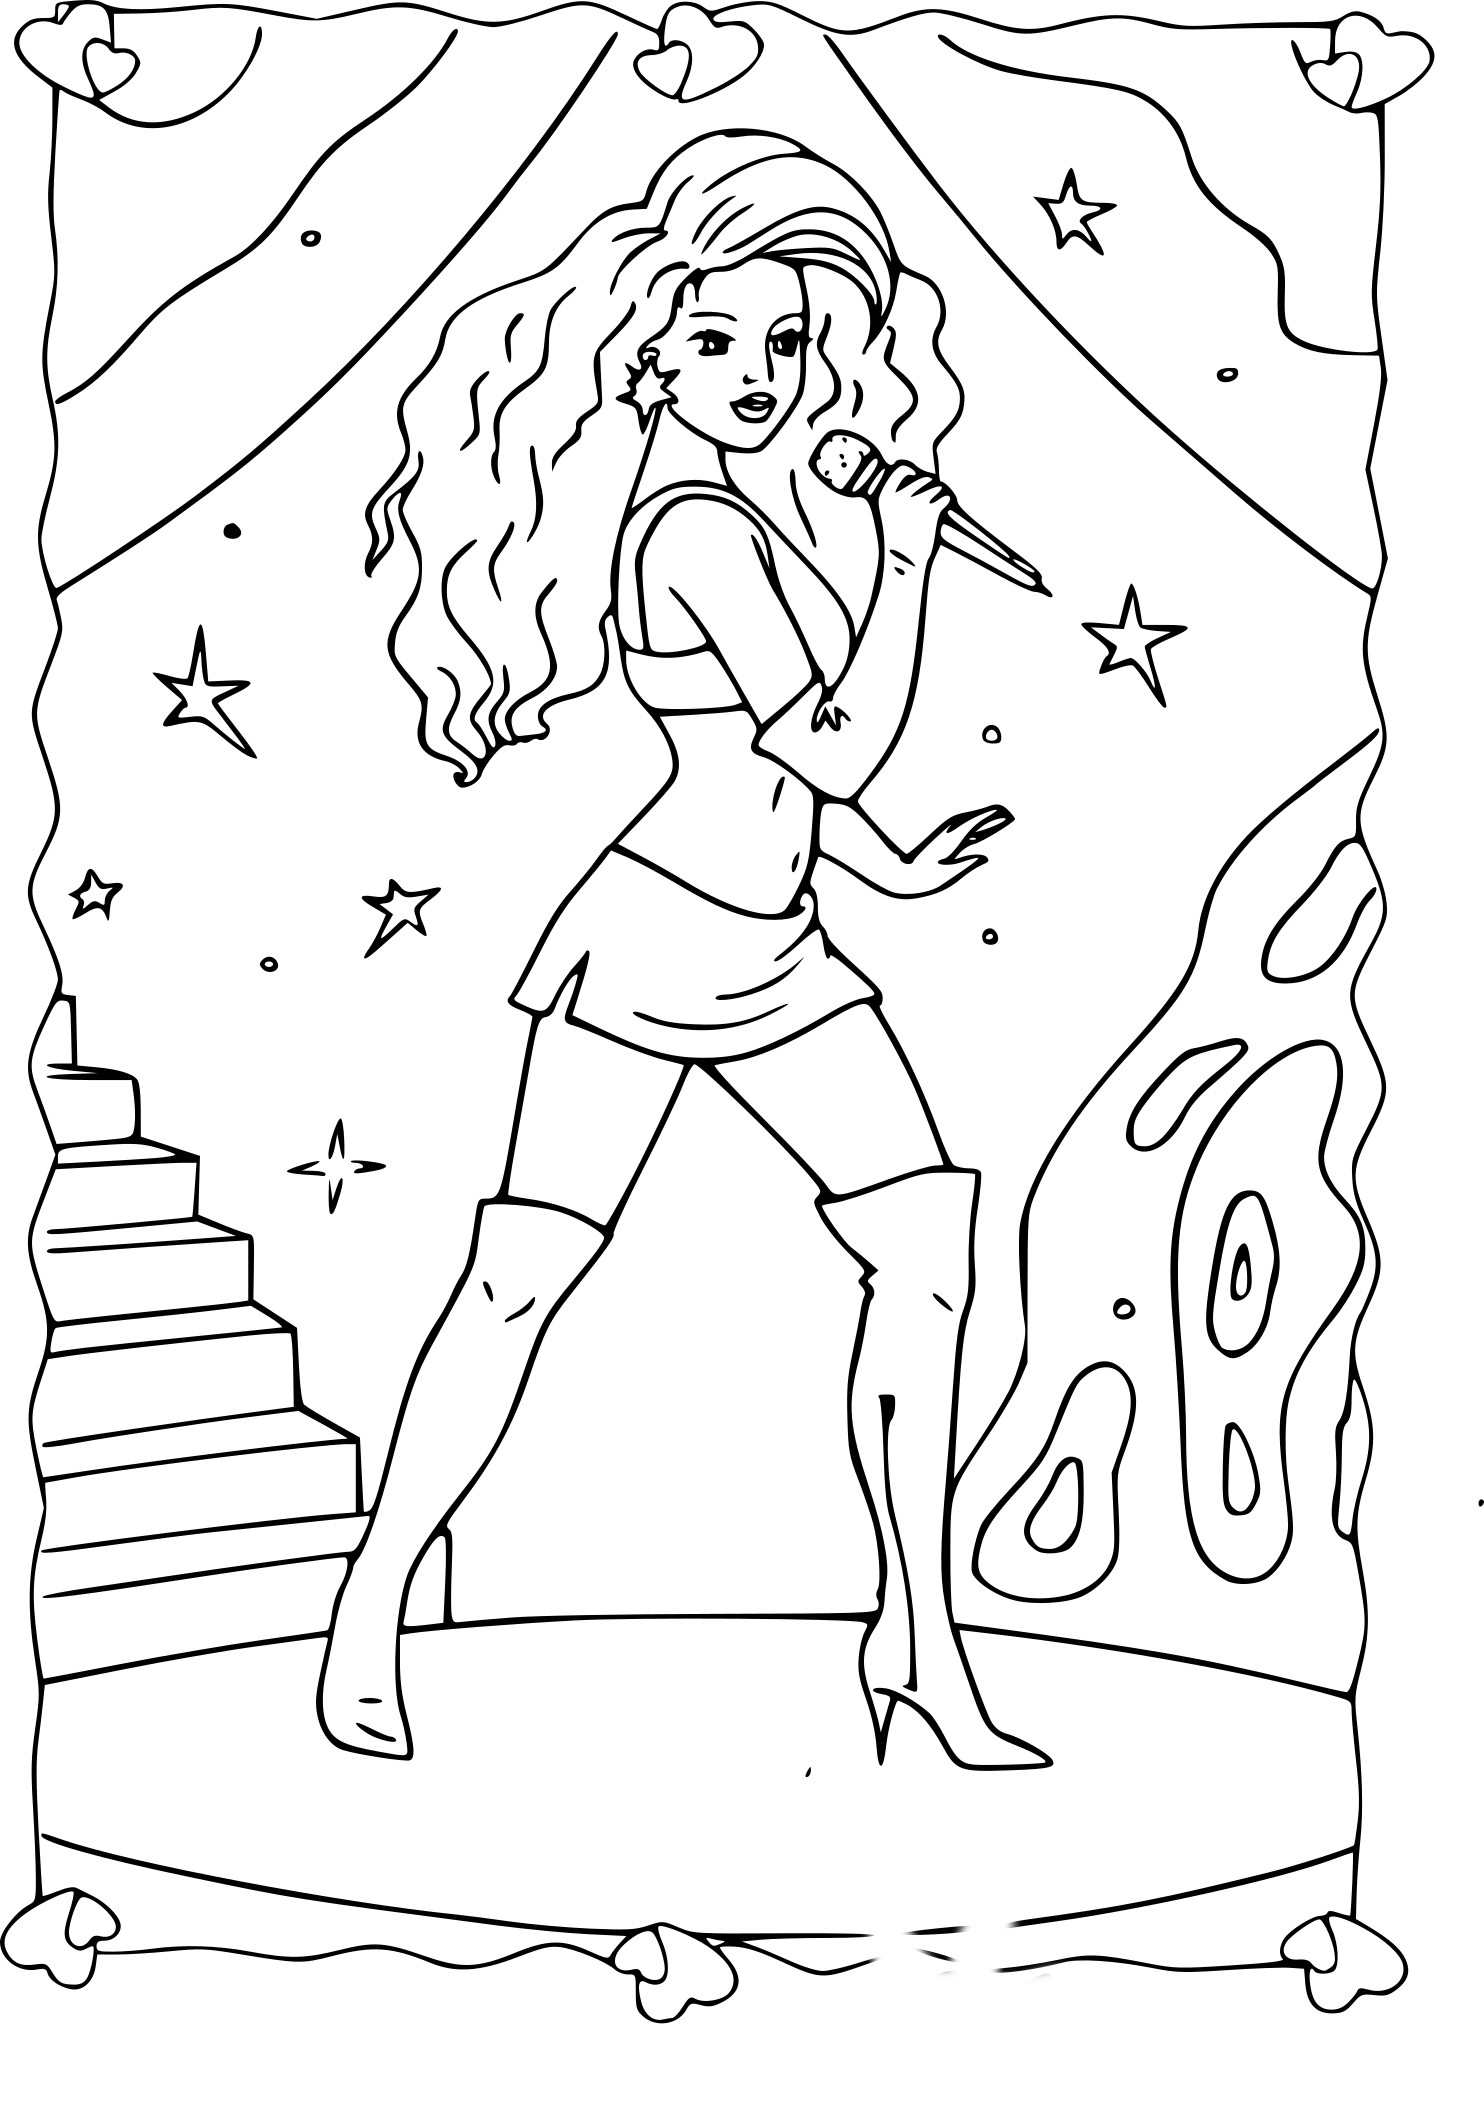 Girl Star Of The Song coloring page